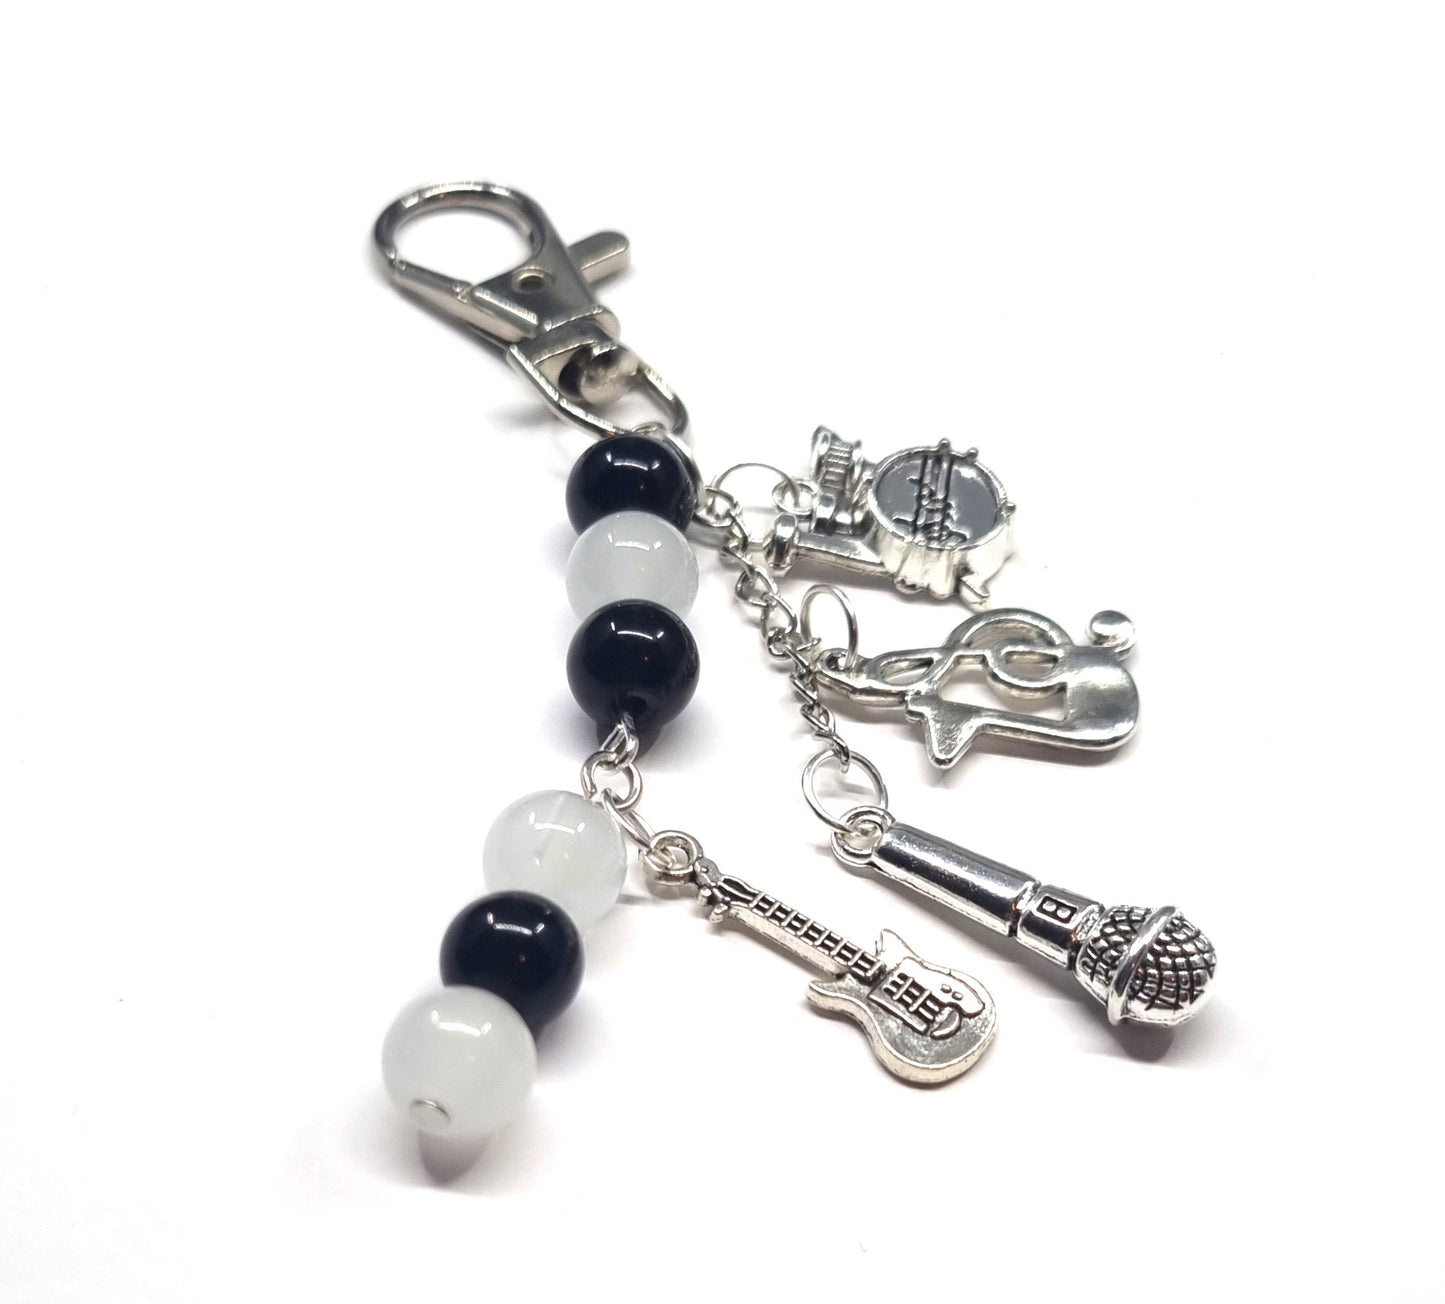 Music Inspired Keyring with Instrument Charms